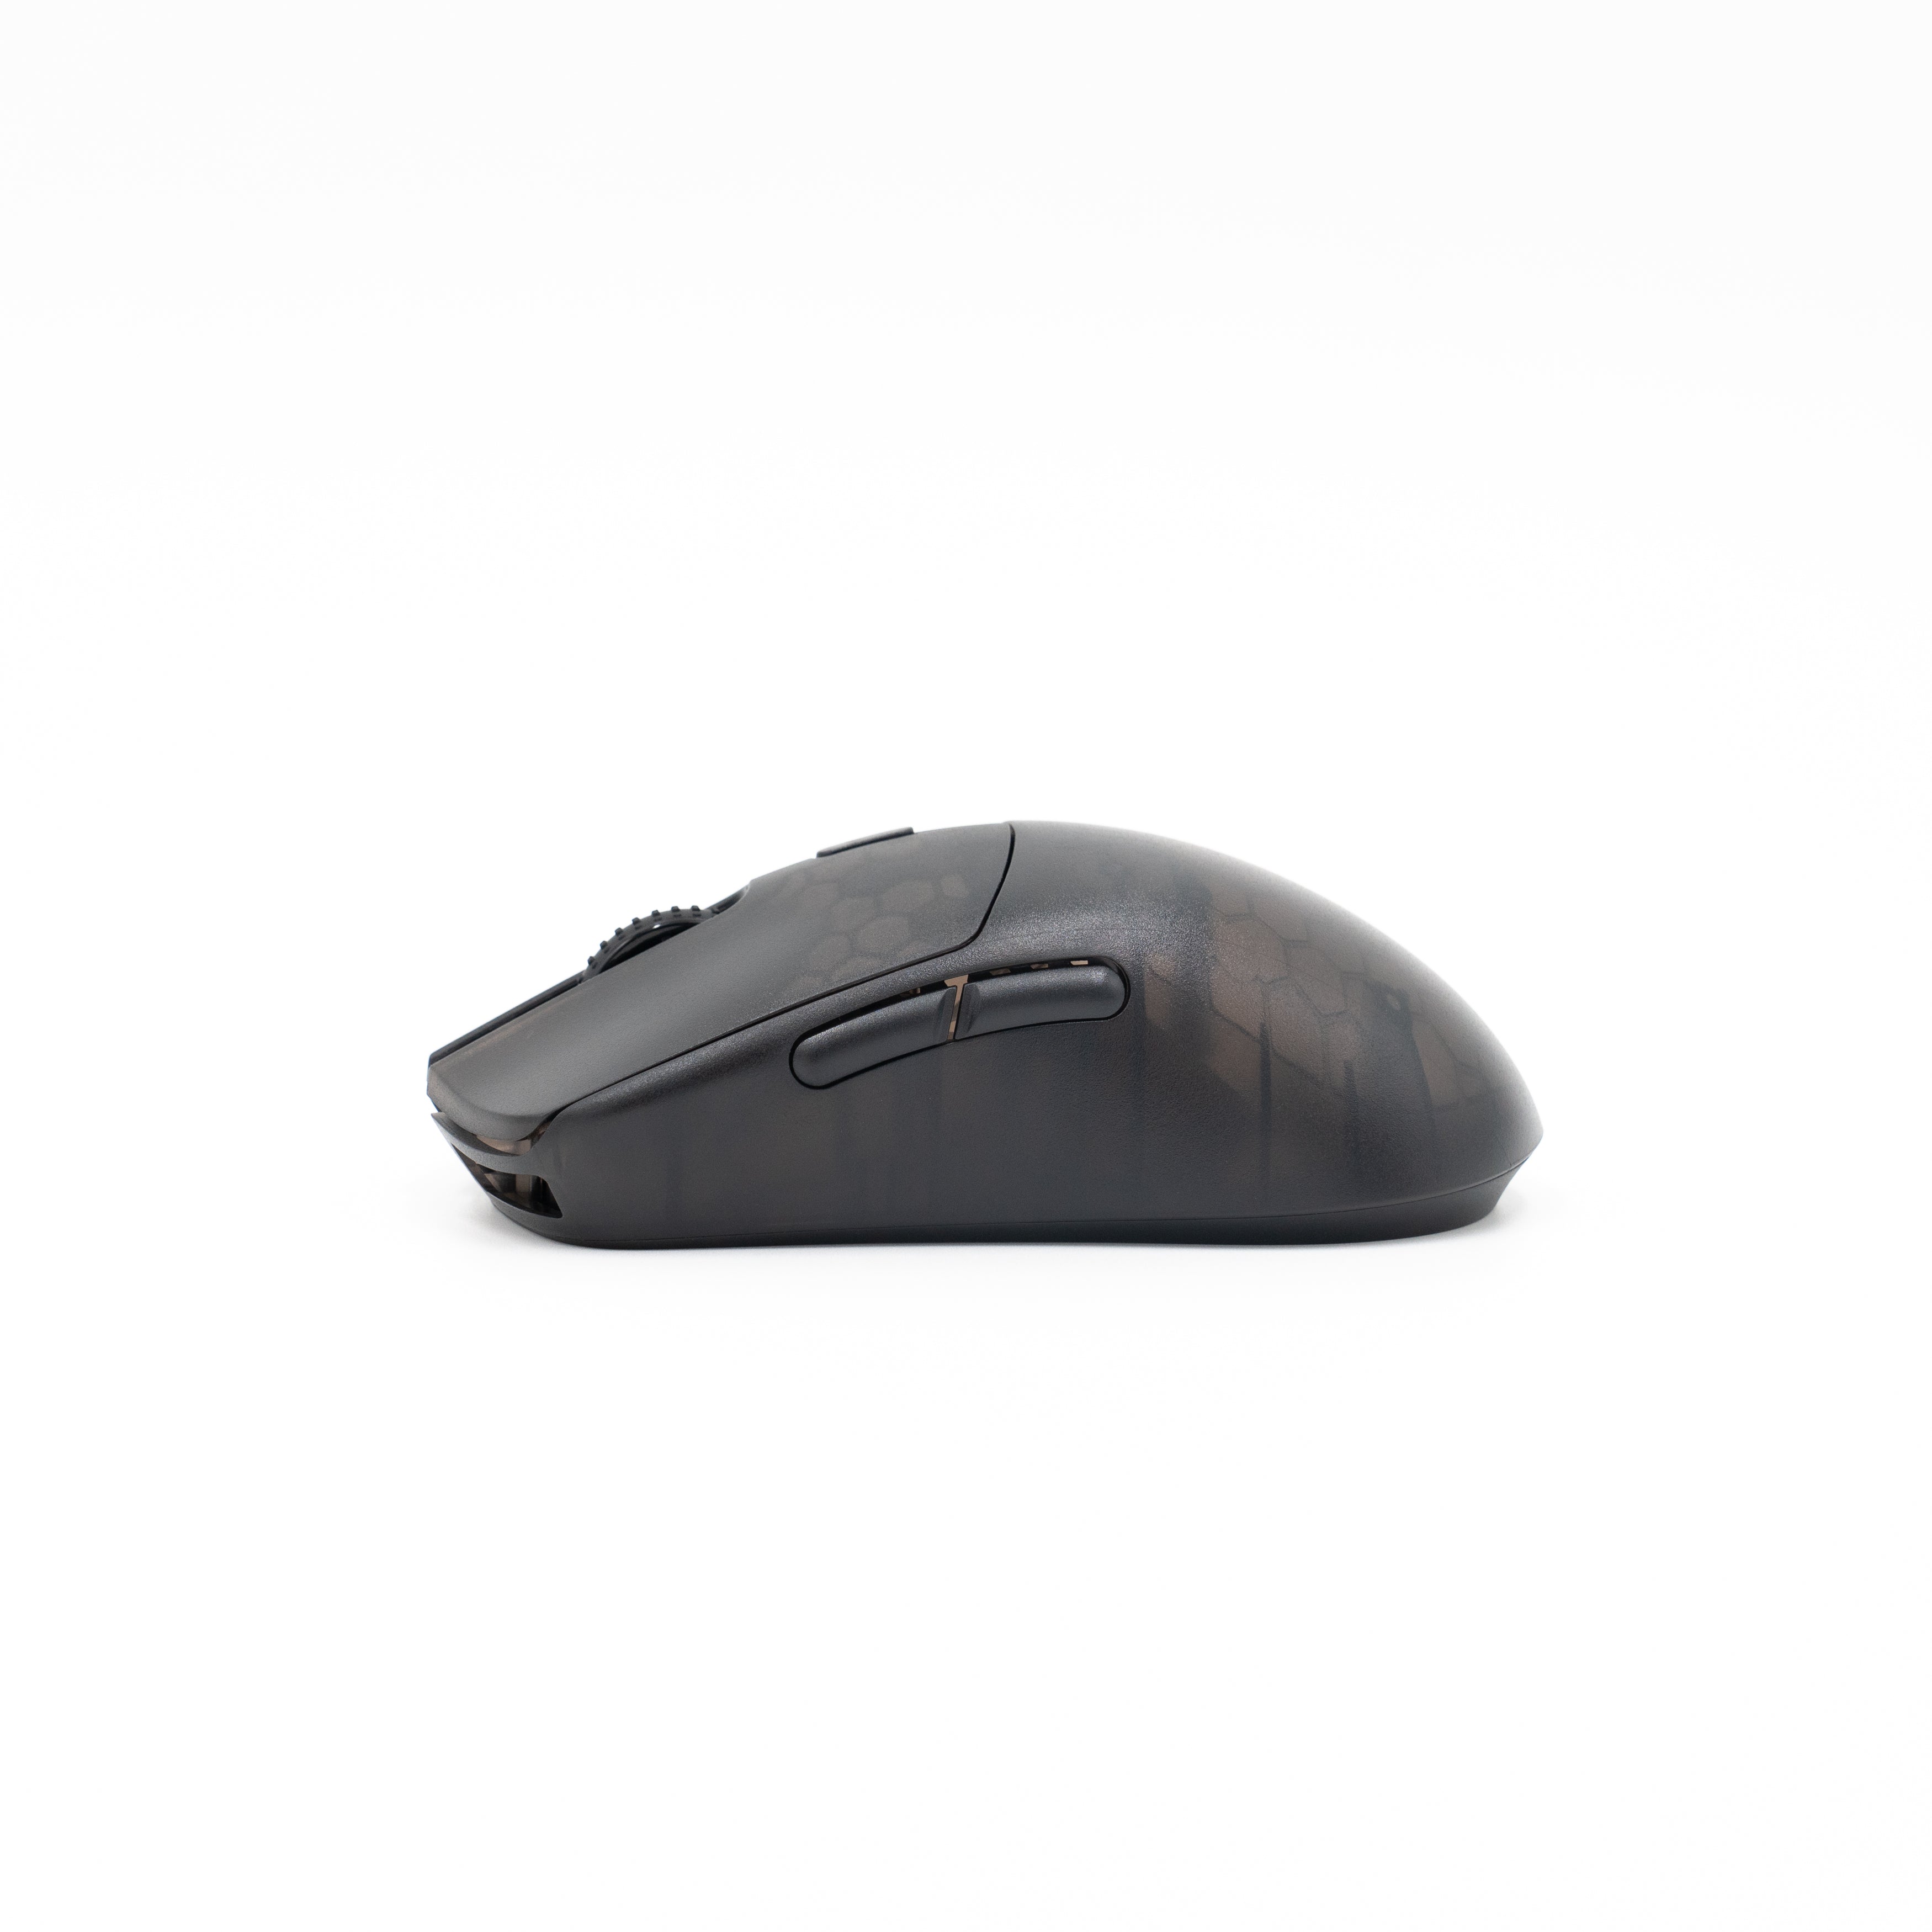 HTS Plus ( HTS+ ) 4K Wireless Gaming Mouse